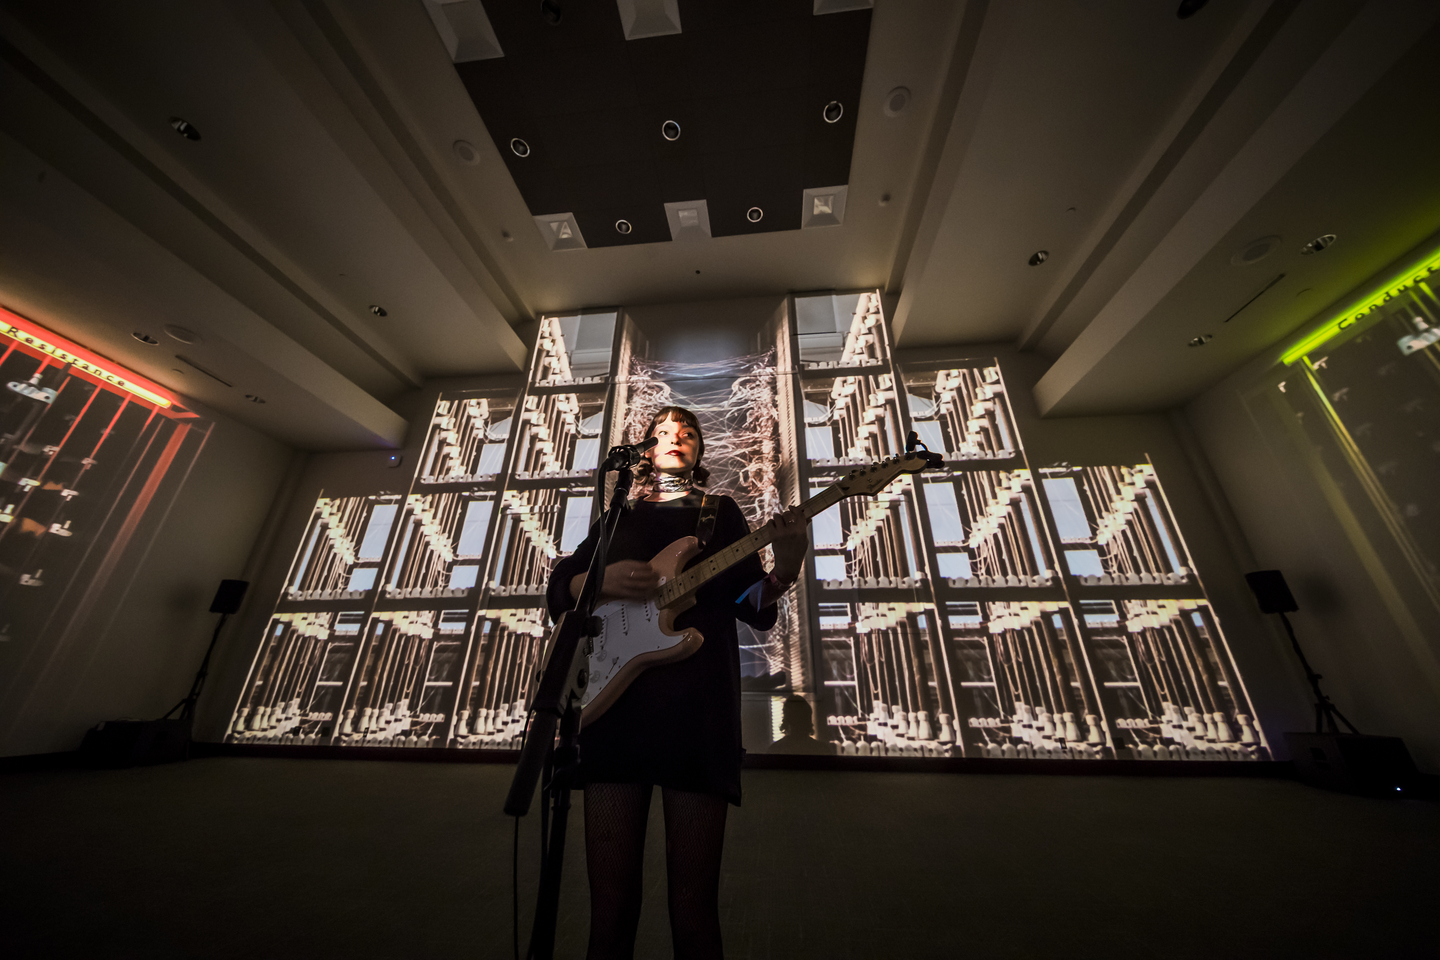 Stella Donnelly performs for NPR’s SXSW Lullabys in front of the Conductors and Resistance installation by Ronen Sharabani, part of the SXSW Art Program, is on display through Saturday in Room 3 at the Austin Convention Center.